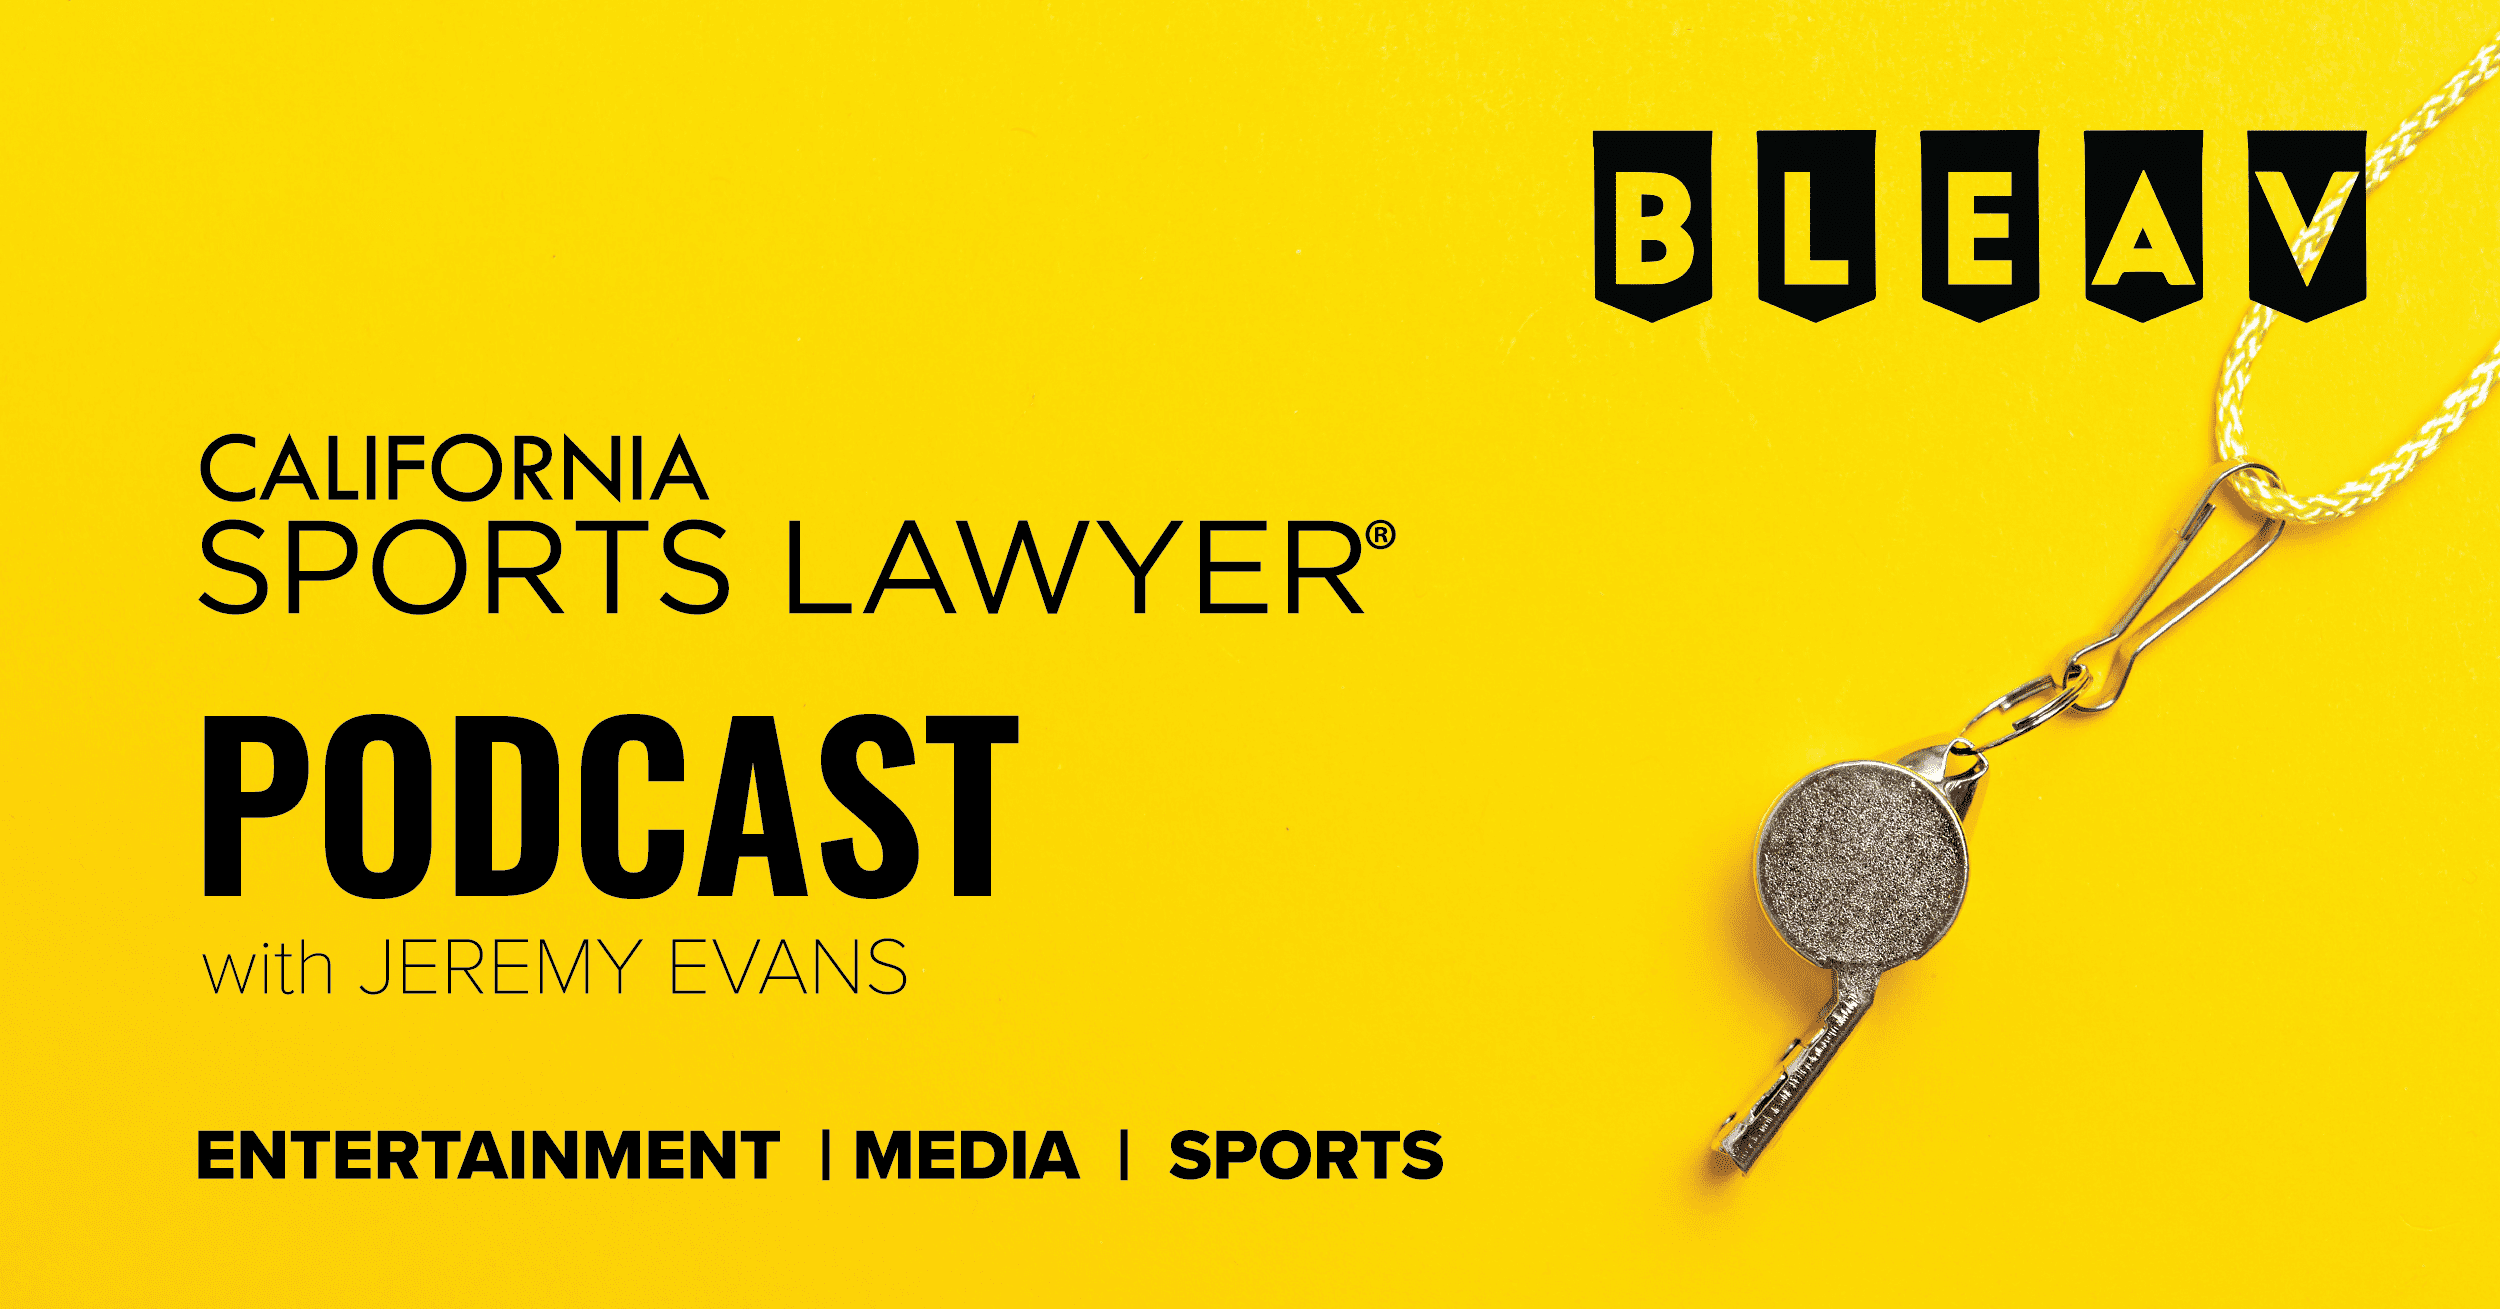 California Sports Lawyer® Podcast with Jeremy Evans: Emerging Technology leading to Dealmaking and Disputes